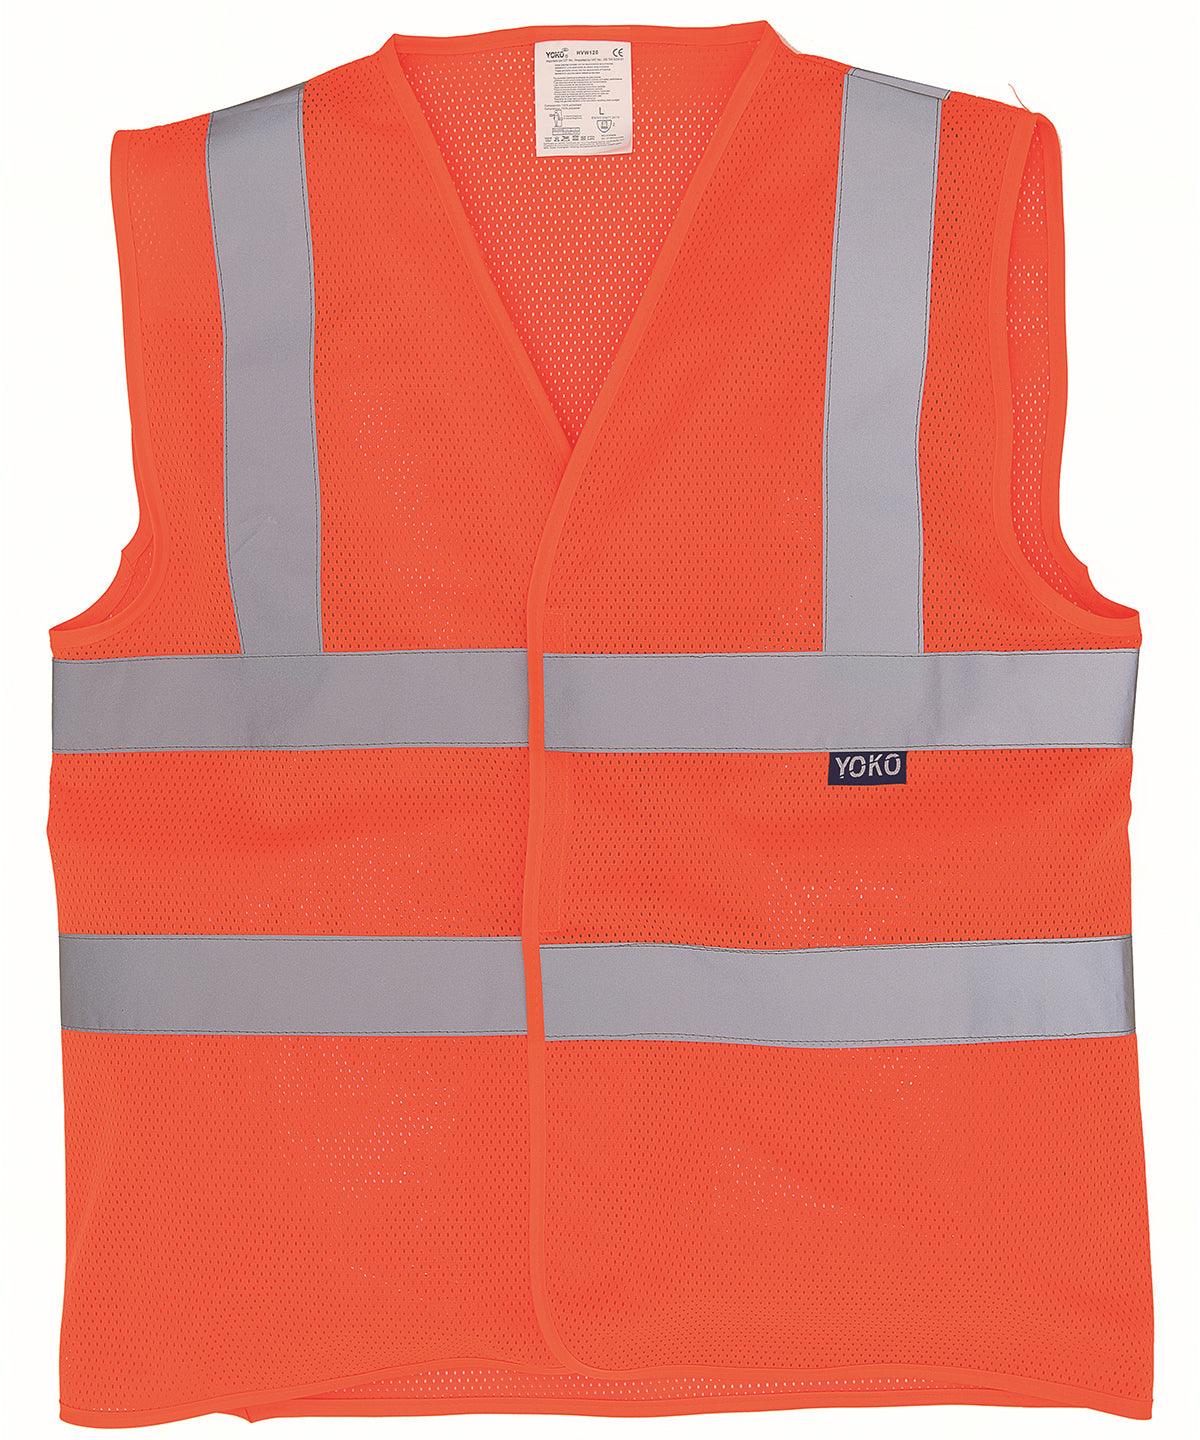 Orange - Top cool open mesh 2-band-and-braces waistcoat (HVW120) Safety Vests Yoko Plus Sizes, Safety Essentials, Safetywear, Workwear Schoolwear Centres